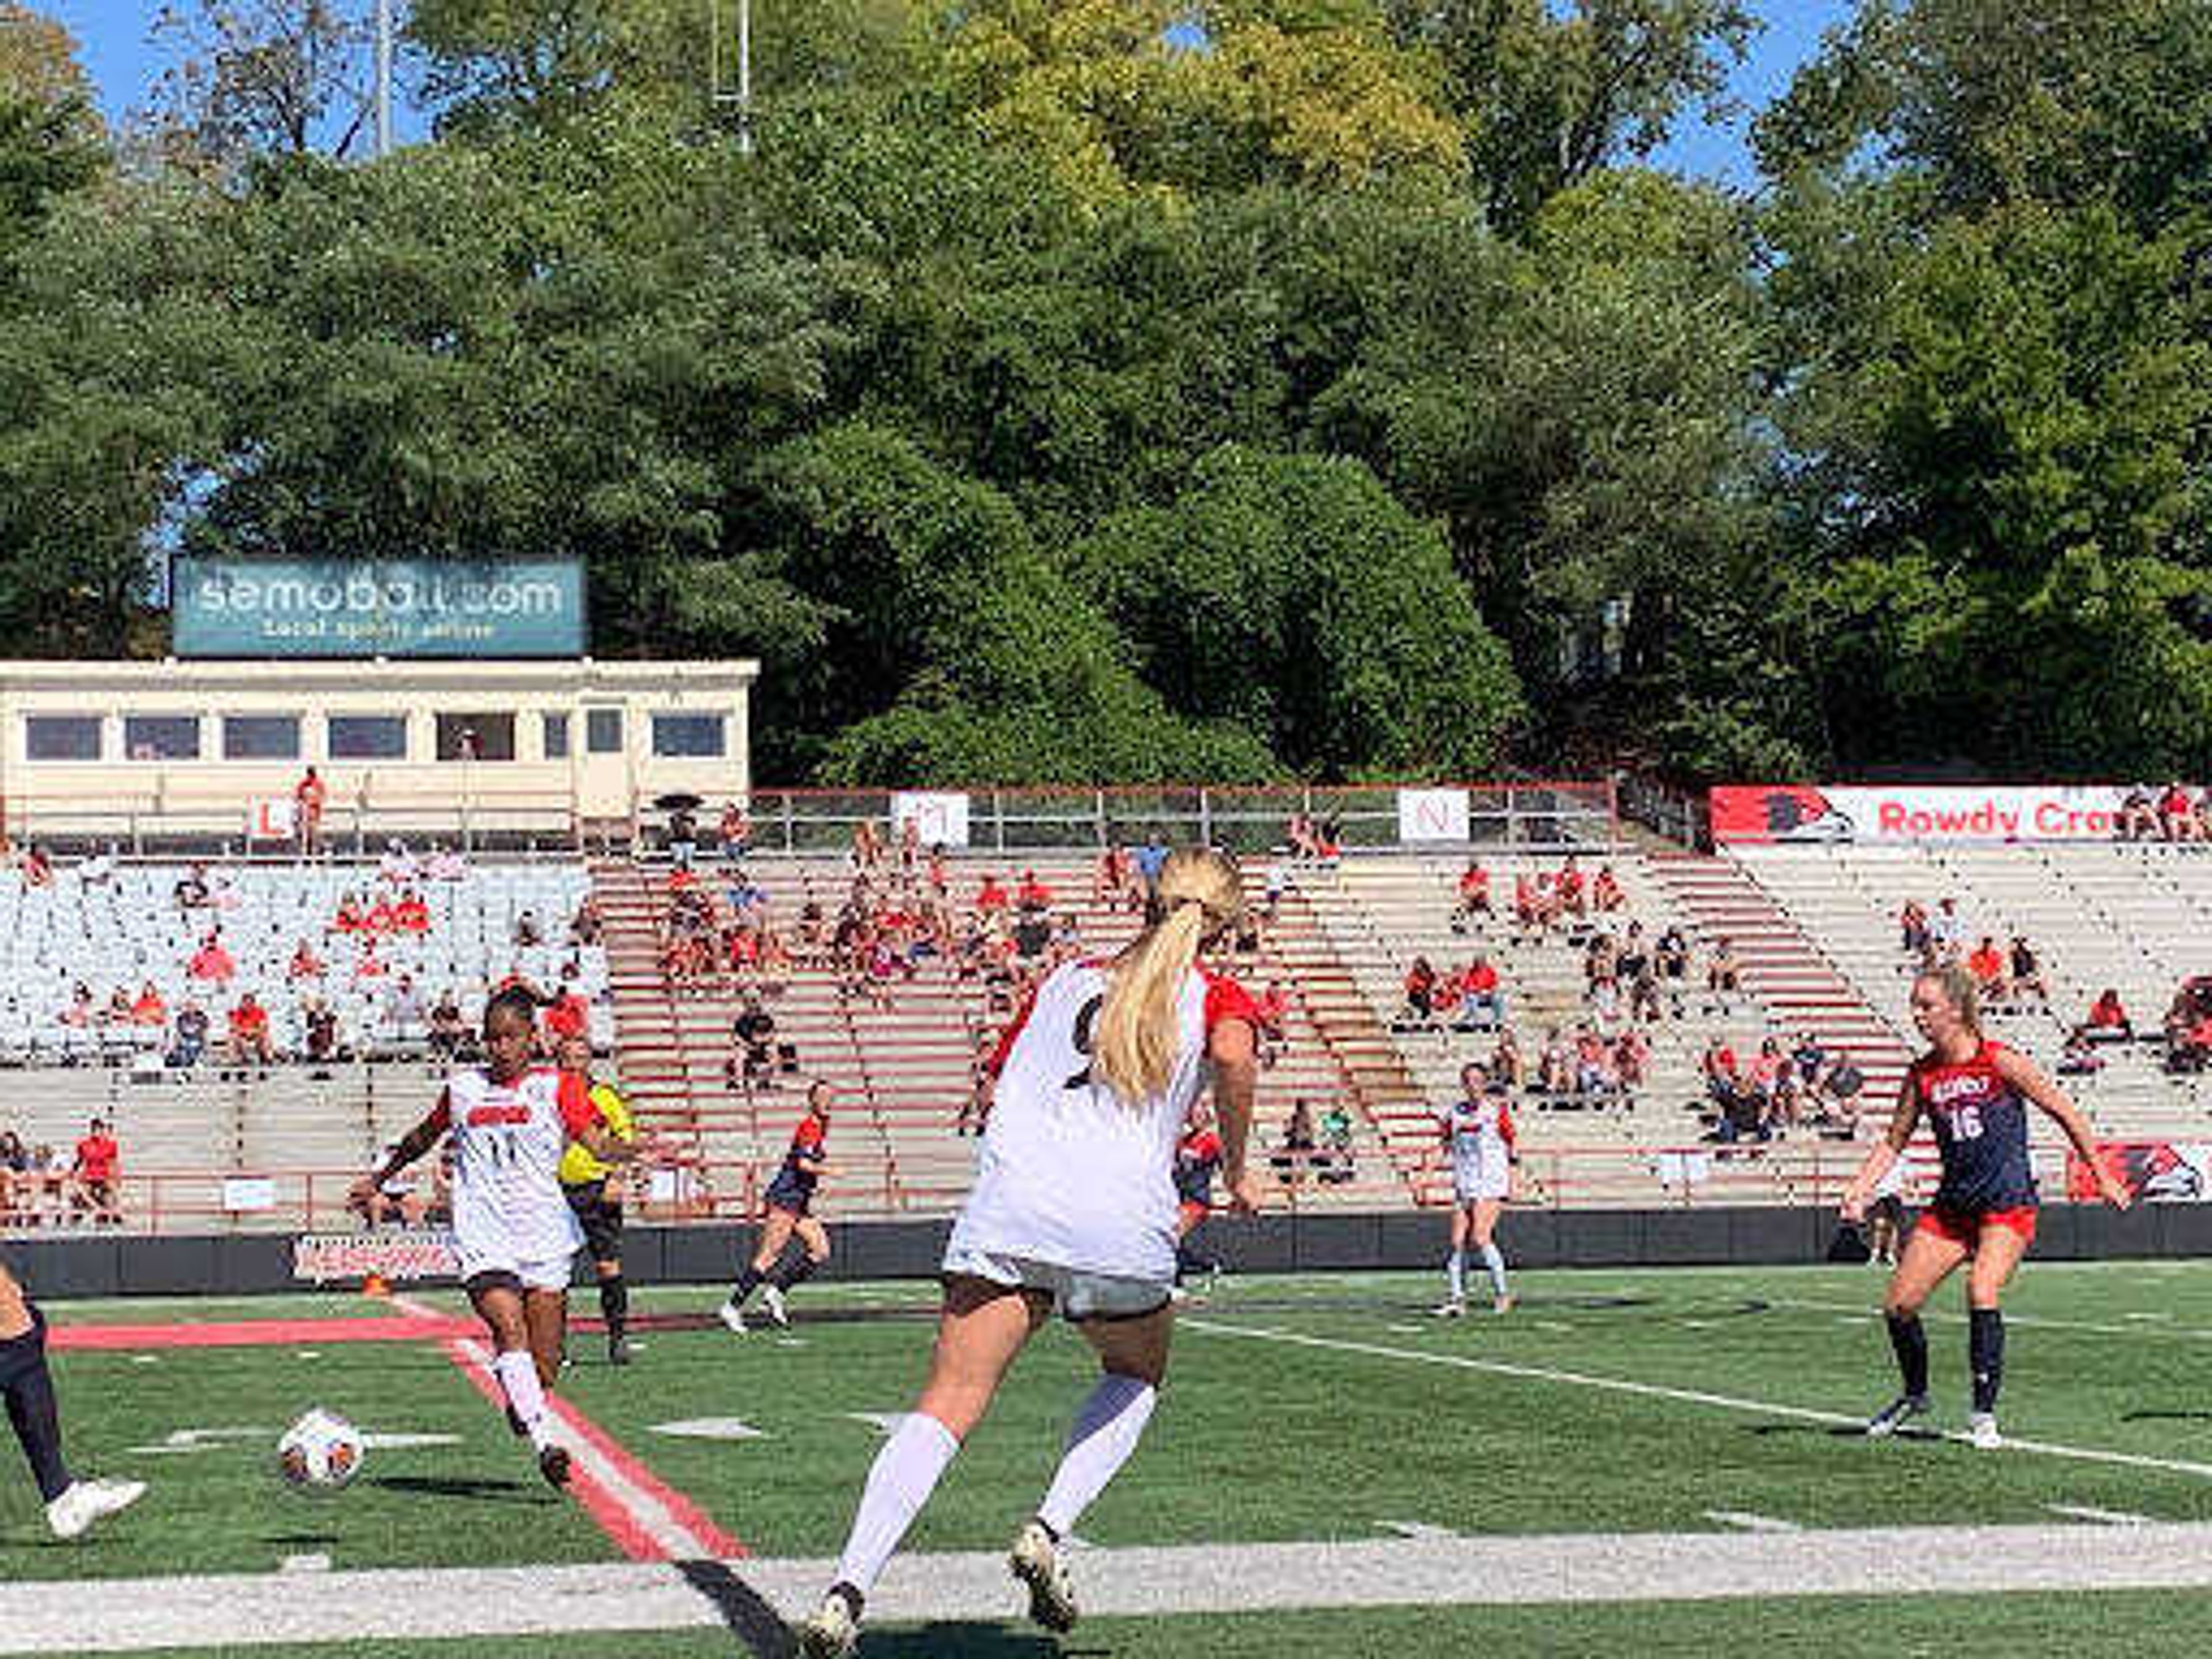 Redhawks sophomore forward/midfielder Kiana Khedoo (11) chases down the ball while senior midfielder Abby Tremain (9) awaits the pass during SEMO’s 1-0 loss to Belmont on Sept. 26 at Houck Stadium in Cape Girardeau.